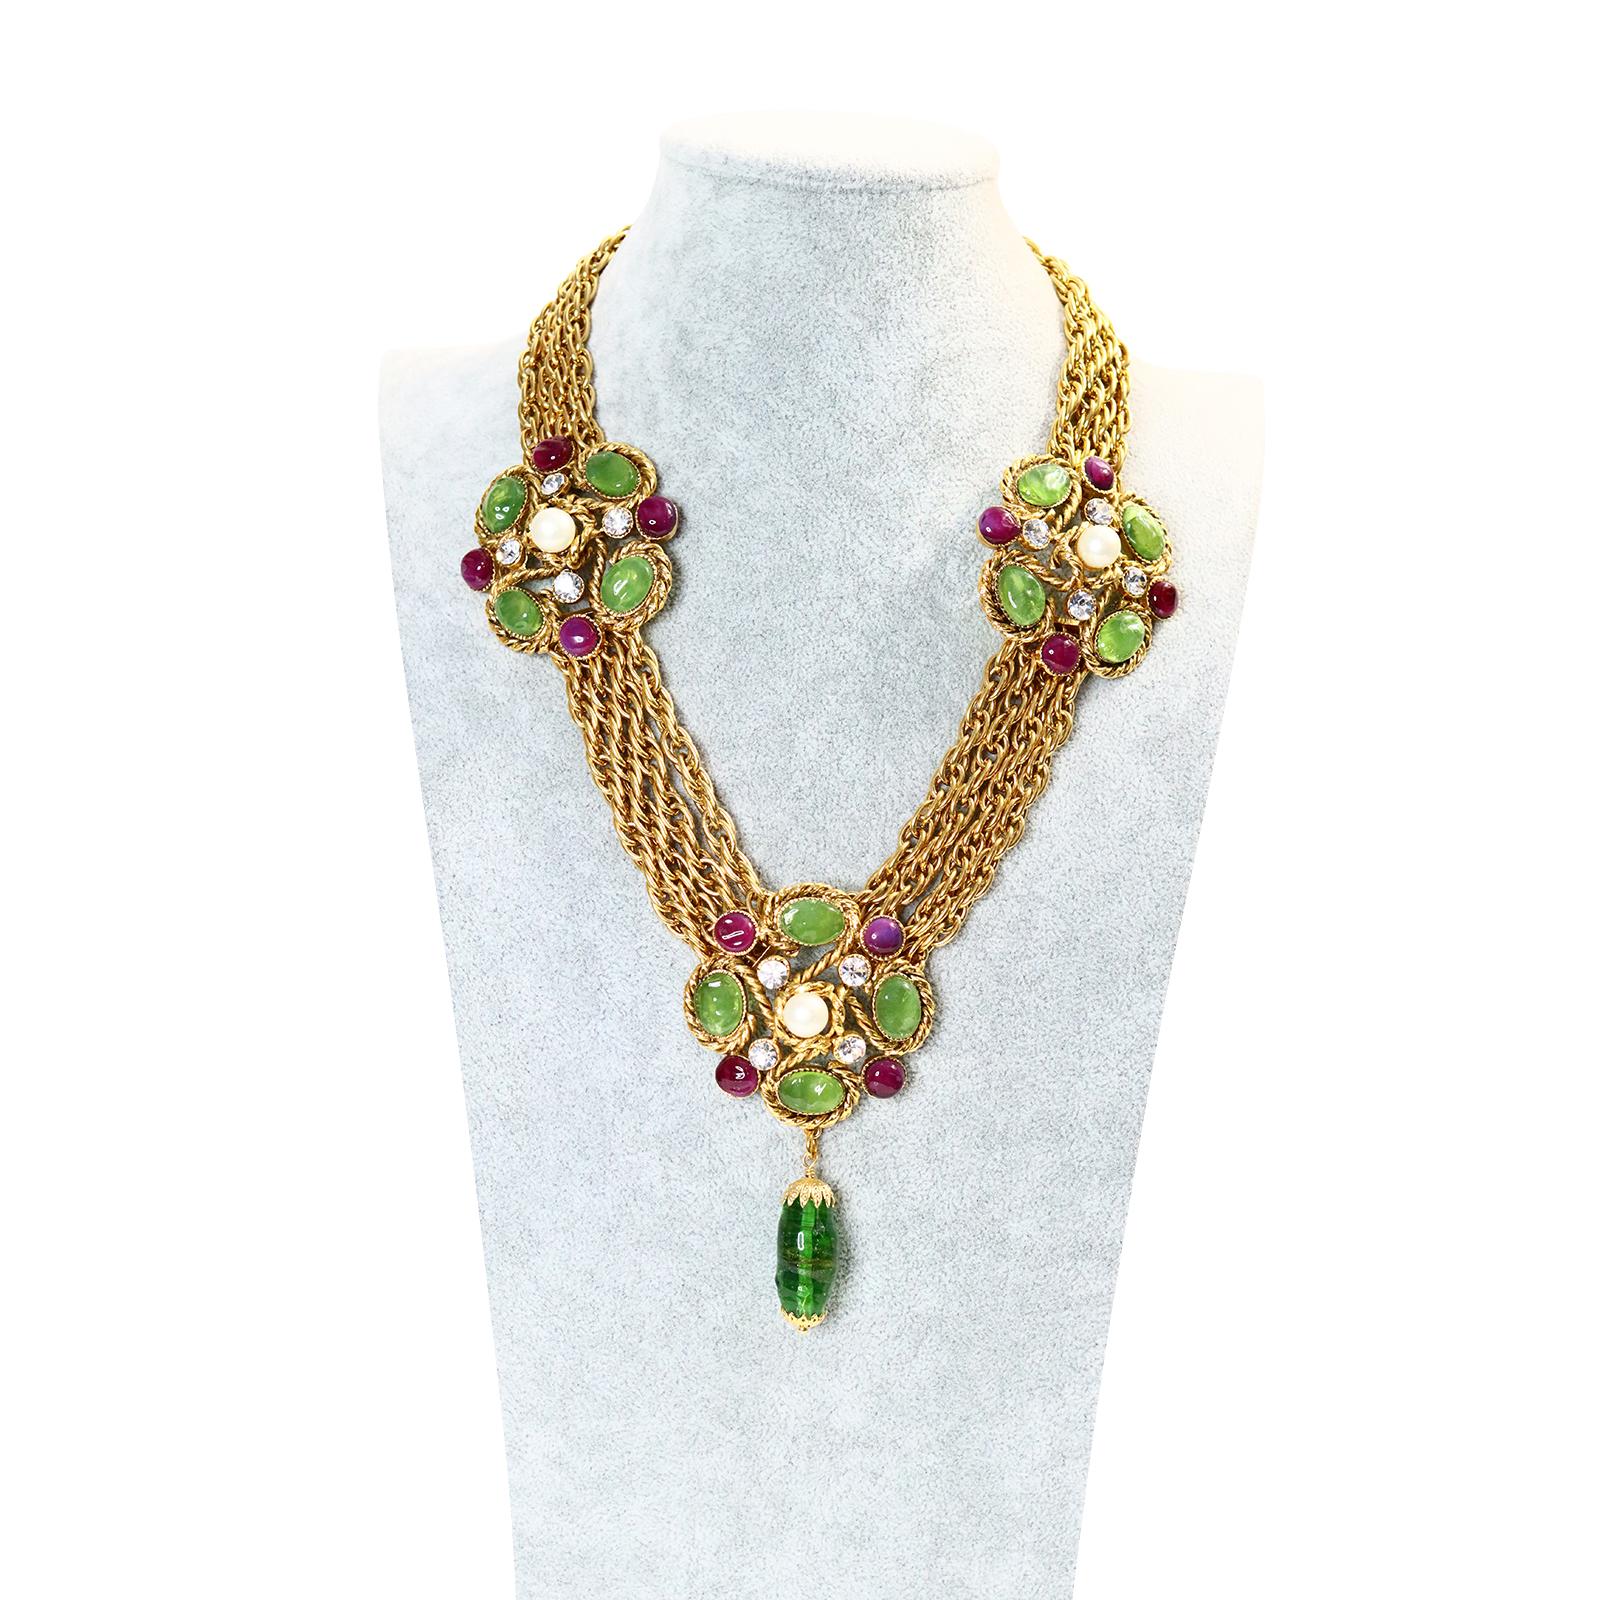 Vintage Maison Gripoix Green, Crystal, Red and Faux Pearl on Gold Chain Necklace with Dangling Green Piece.  3 Different Emblems On Gold Chain with Dangling Green Piece in the Middle.  22